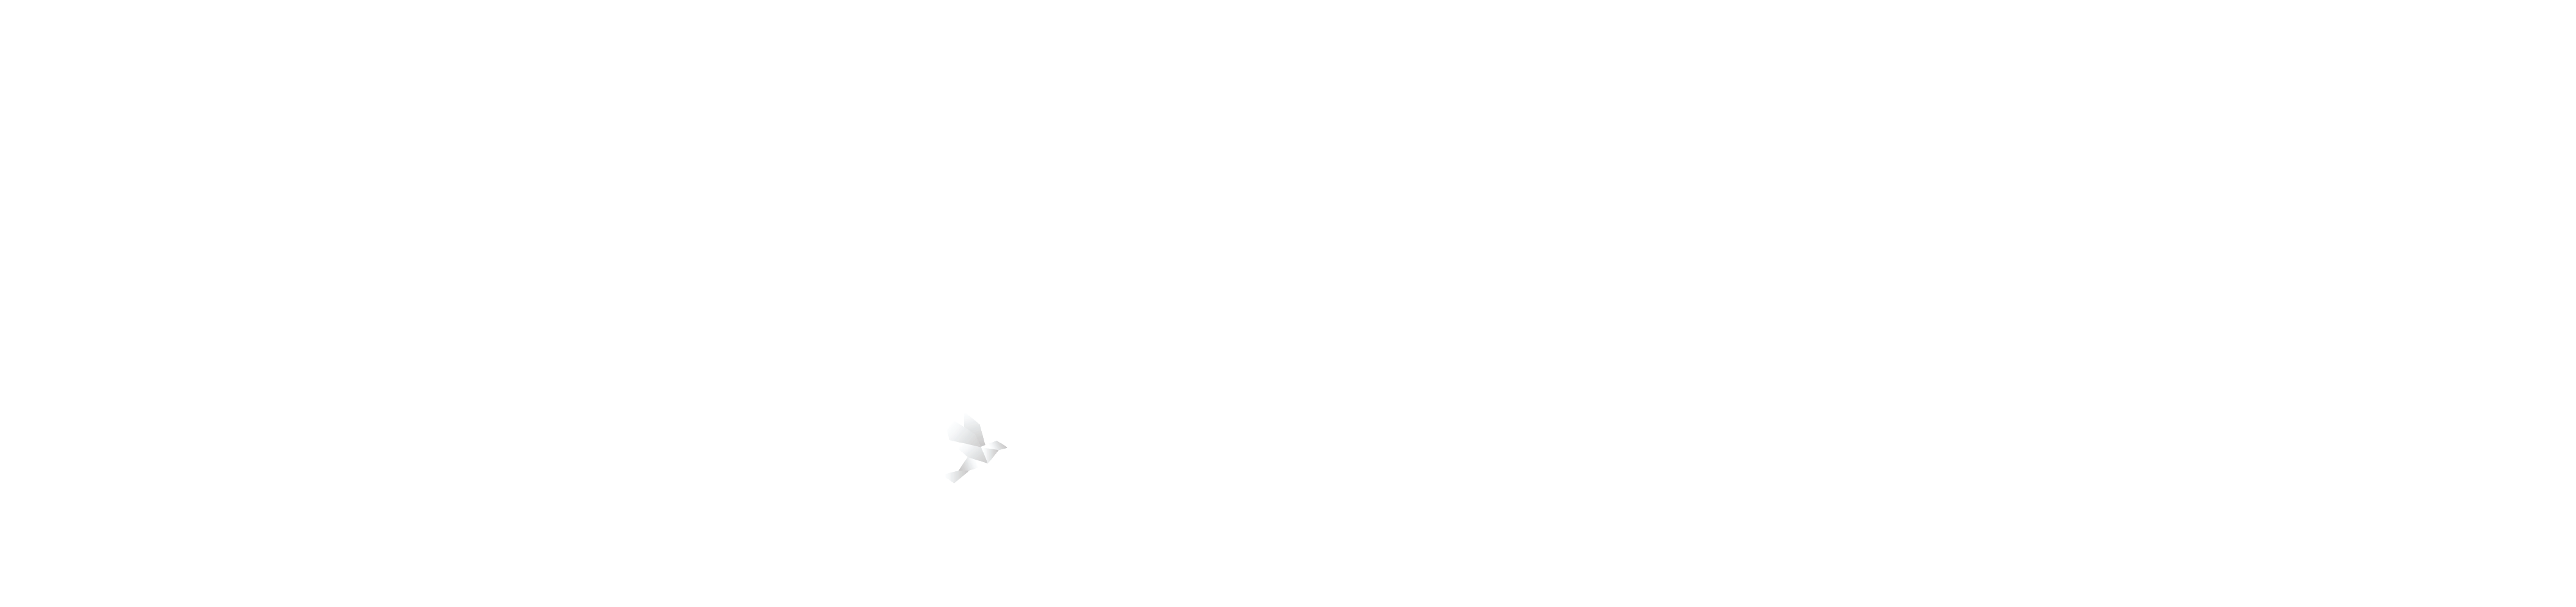 583-payments.png